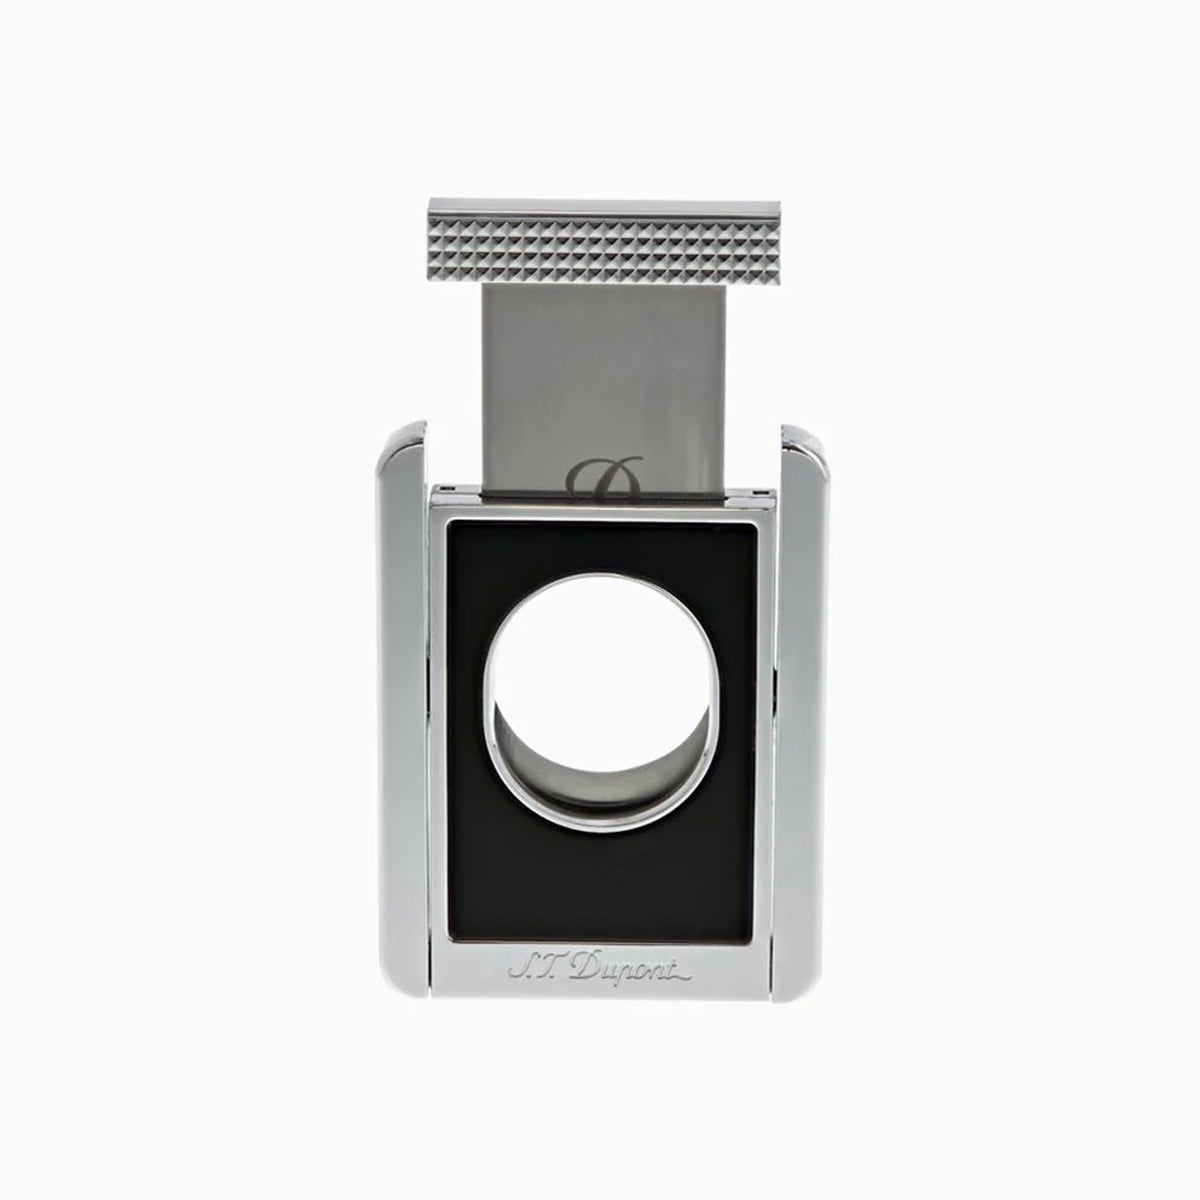 S.T. Dupont Cigar Cutter Stand